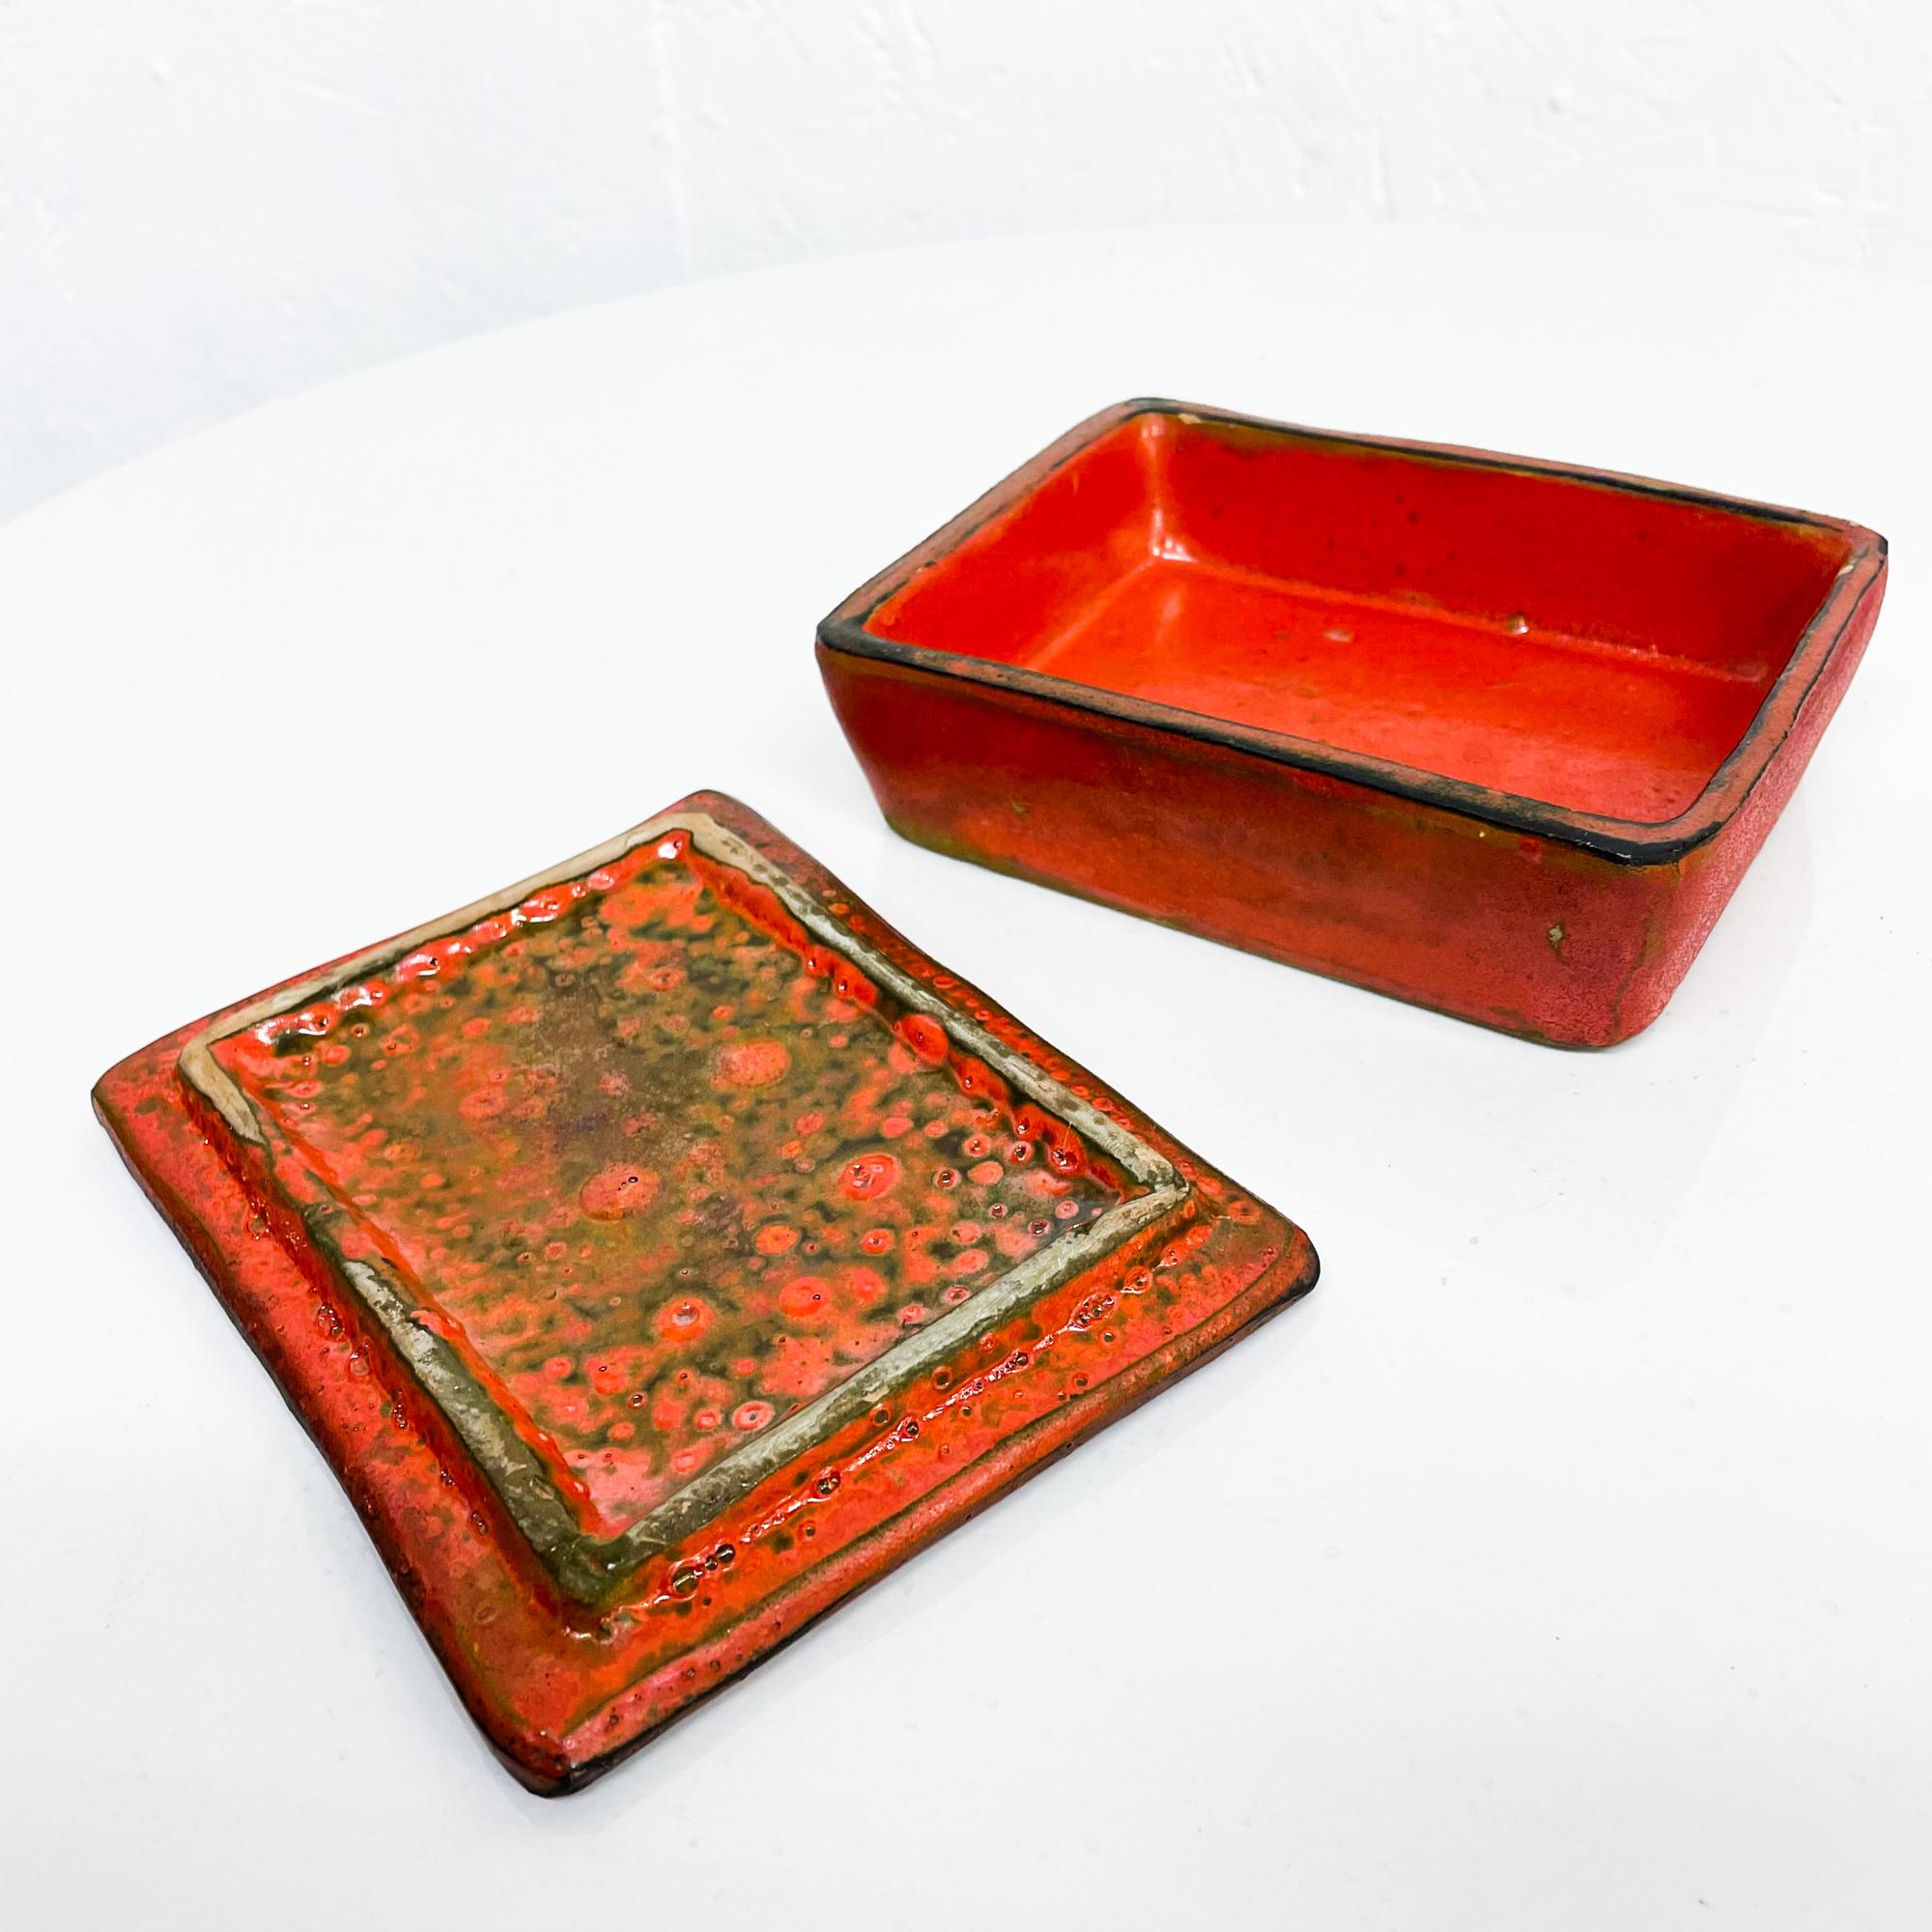 Poteries 1960s Bitossi Pottery Red Lidded Box Relief Design Italy en vente